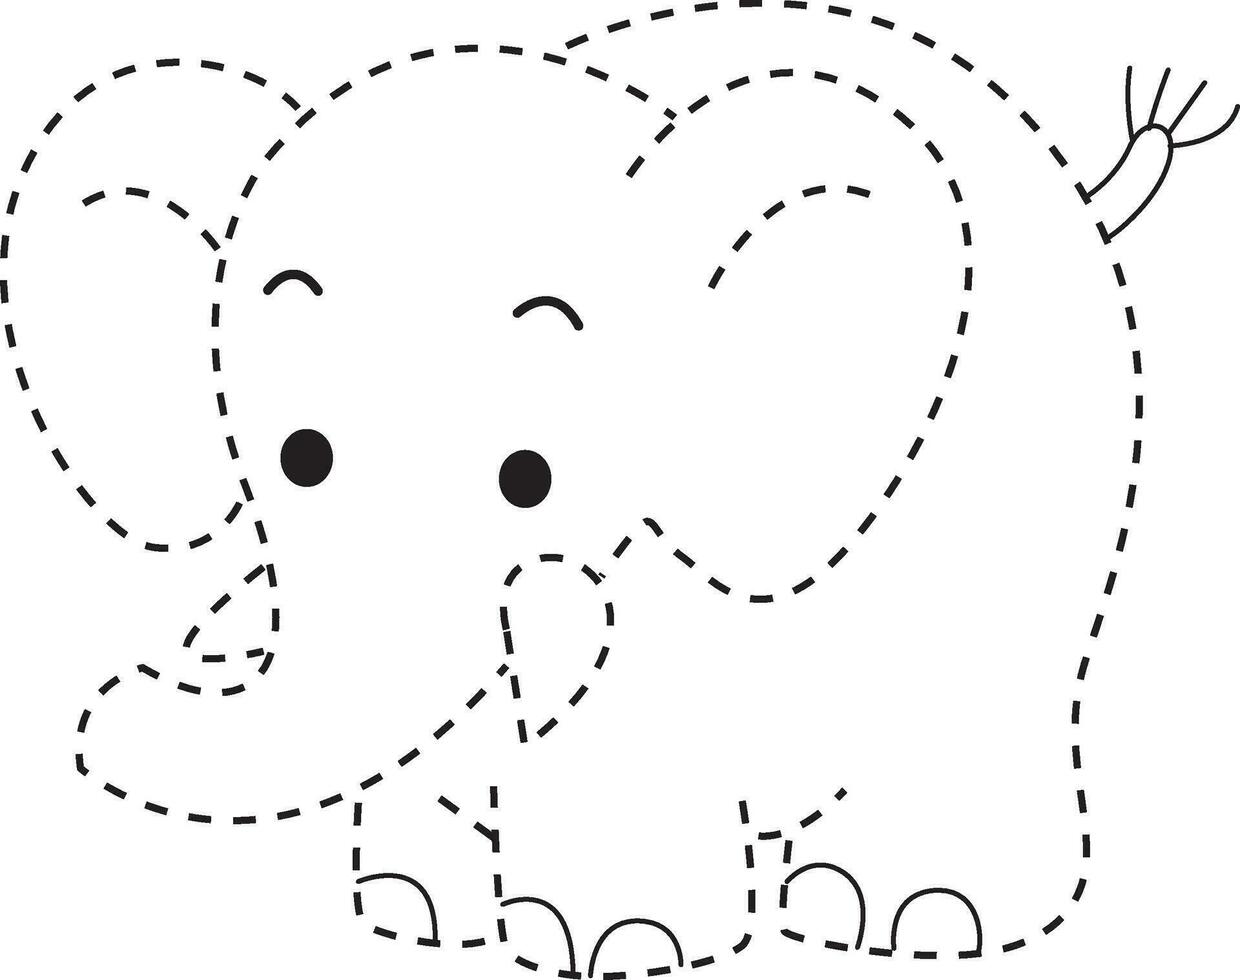 elephant patched practice draw cartoon doodle kawaii anime coloring page cute illustration drawing clip art character chibi manga comic vector